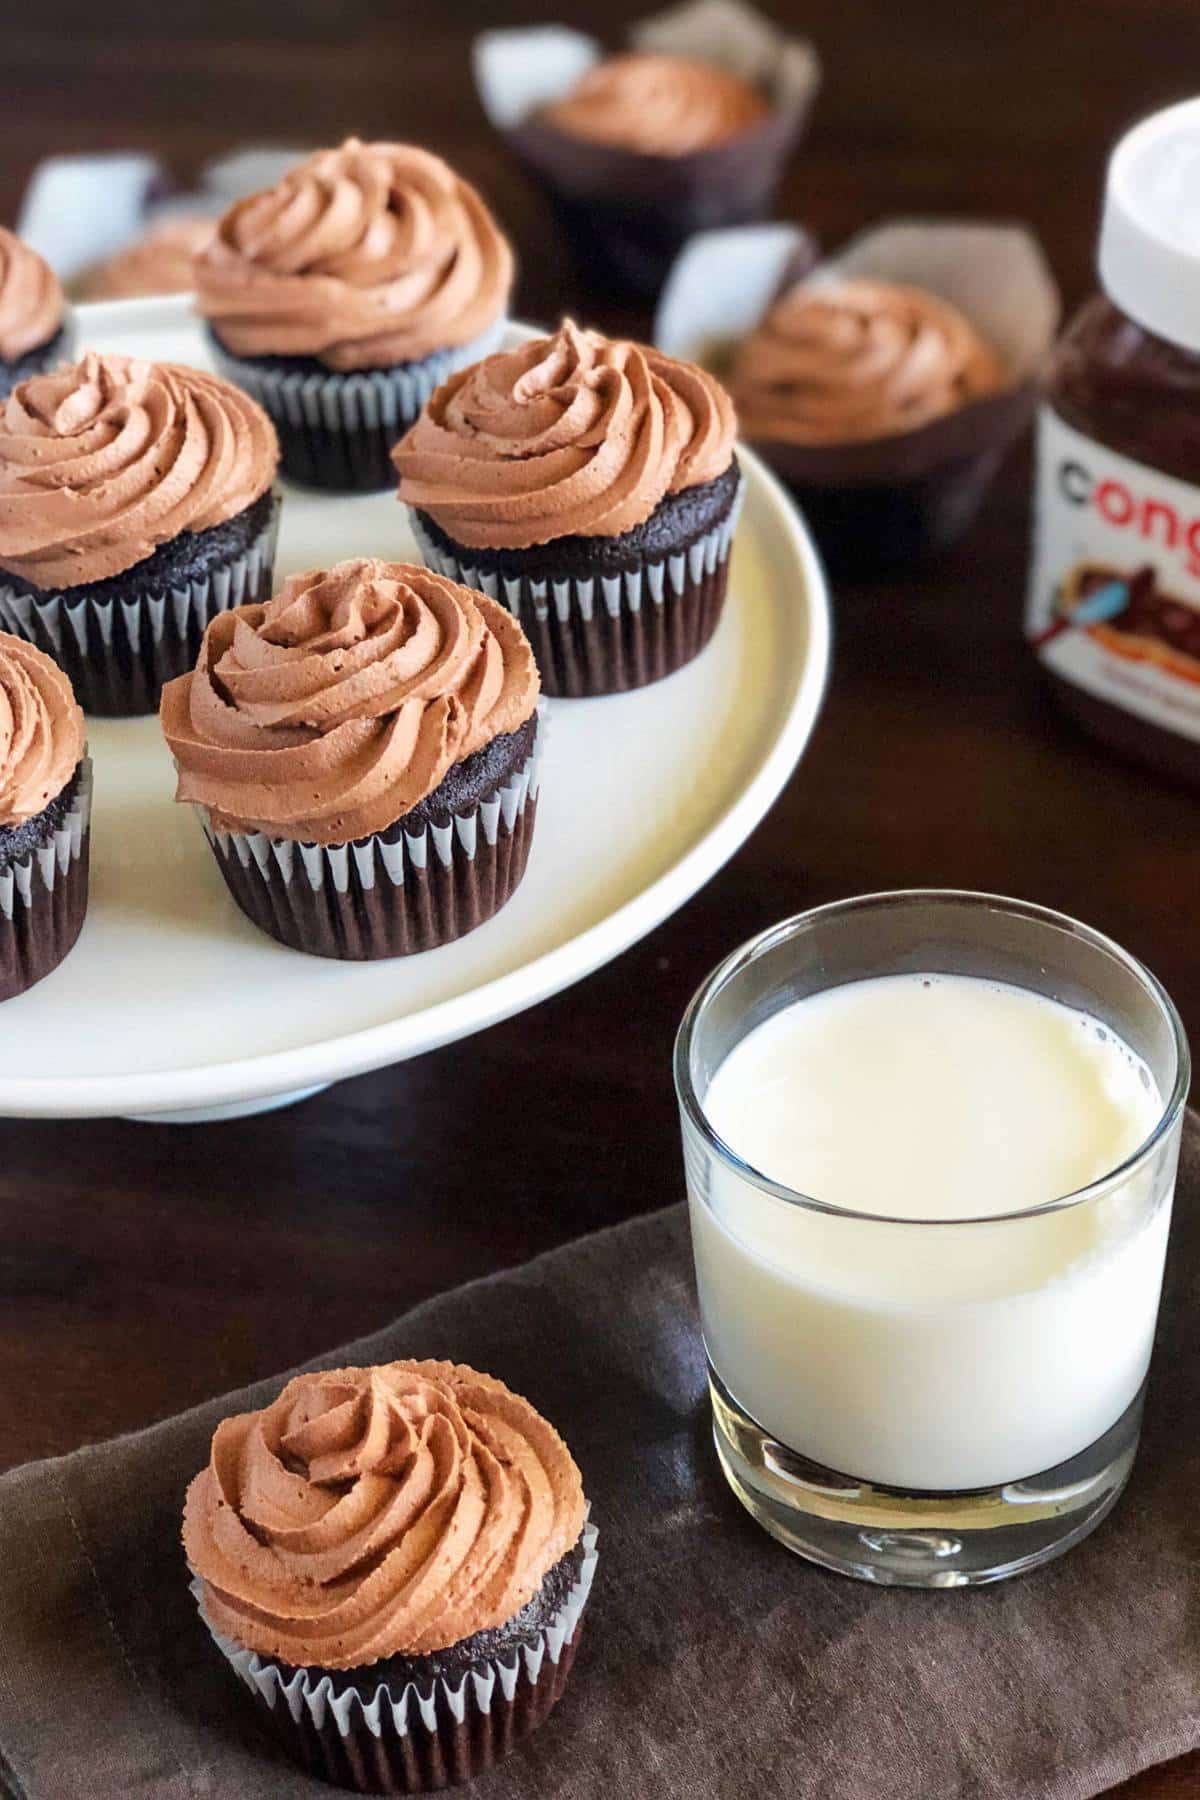 a platter of chocolate cupcakes with light brown chocolate hazelnut frosting next to a brown napkin with a cupcake and a glass of milk